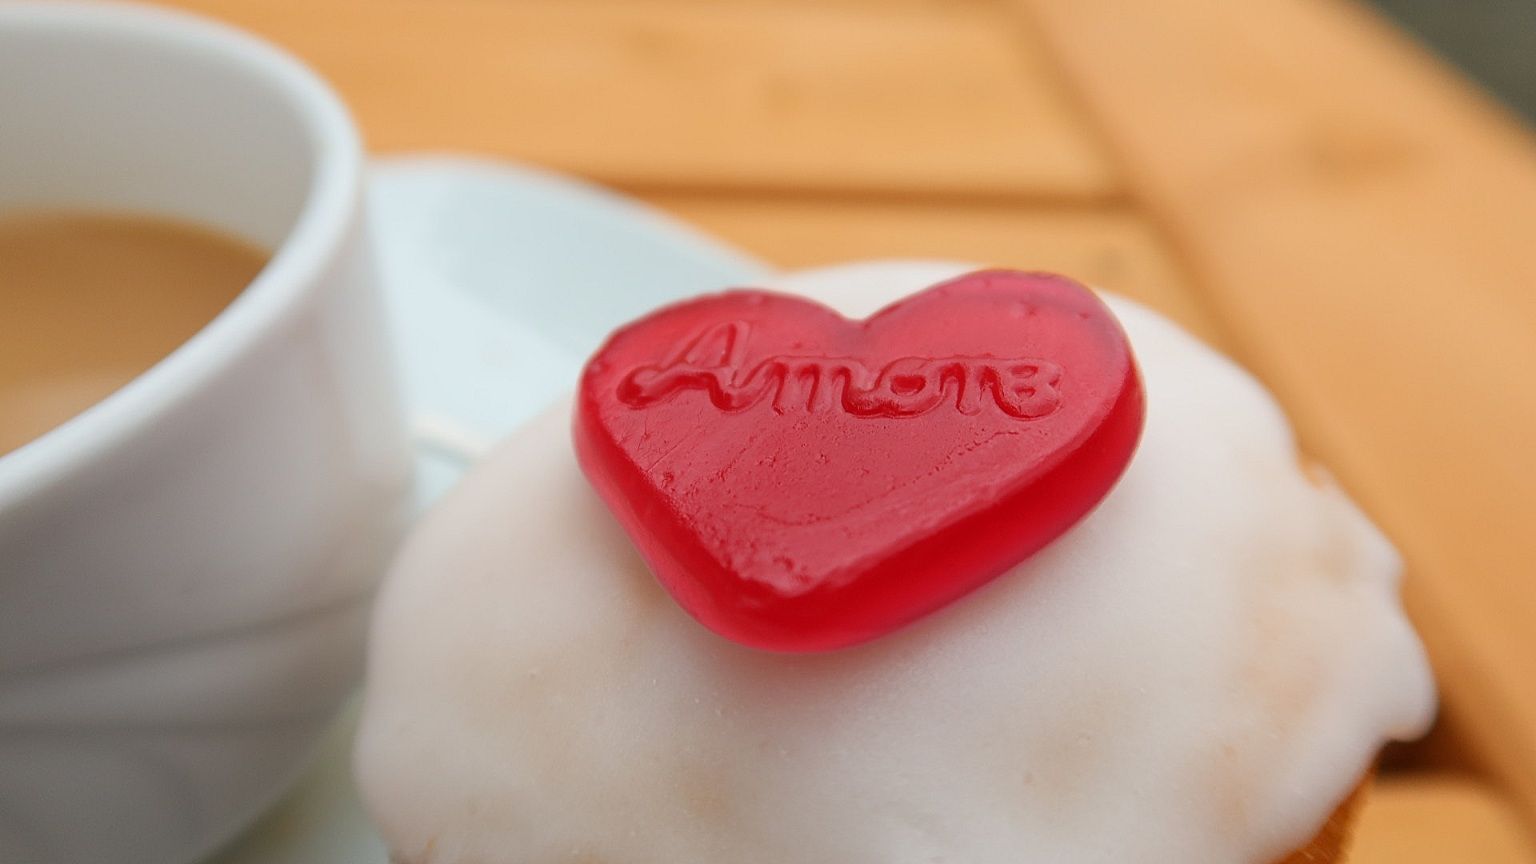 A muffin topped with a red heart saying Amore next to a cup of coffee